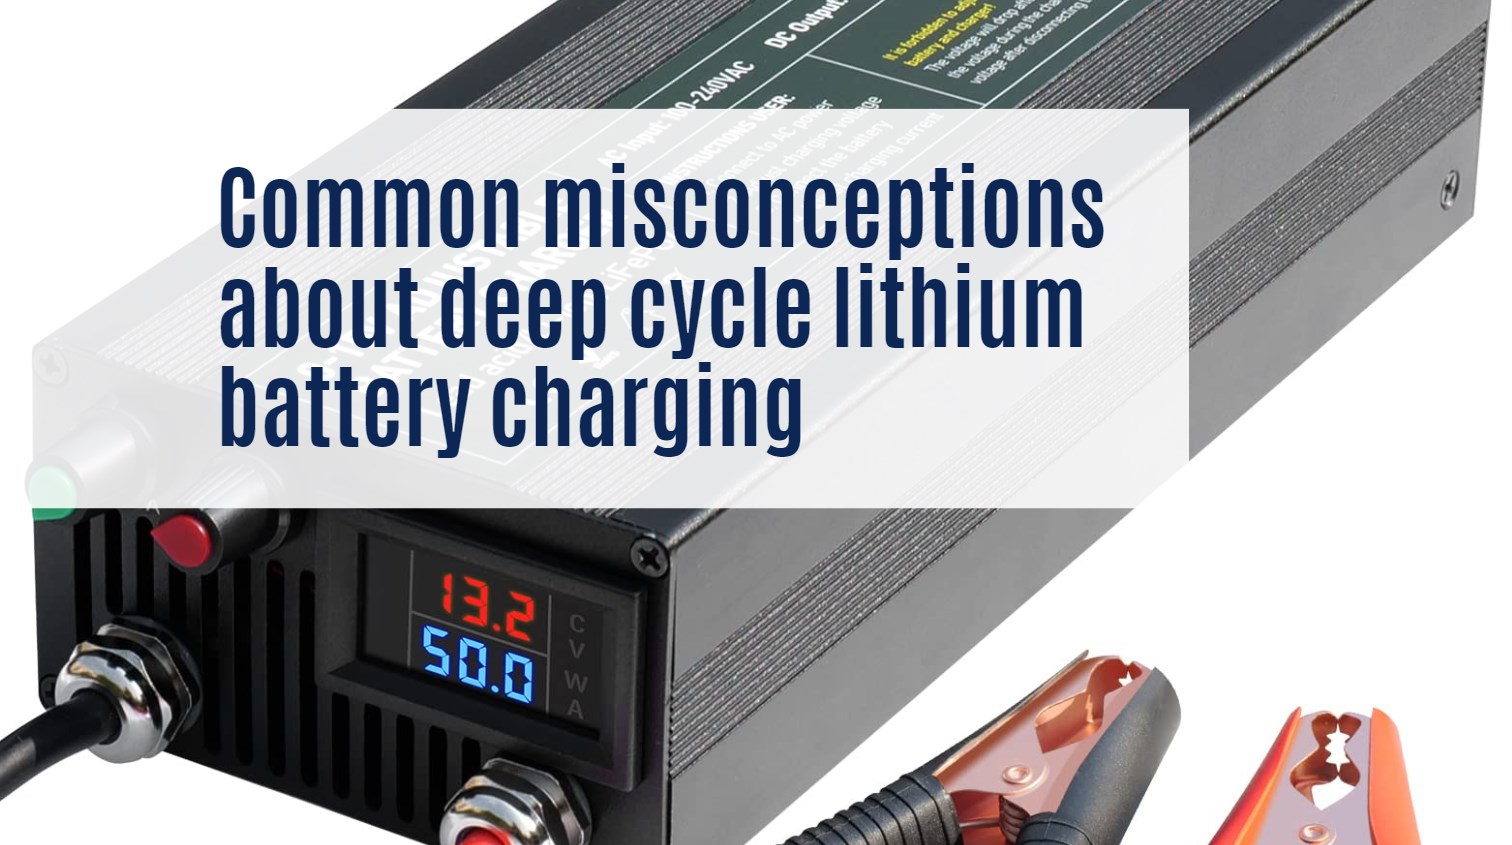 Common misconceptions about deep cycle lithium battery charging